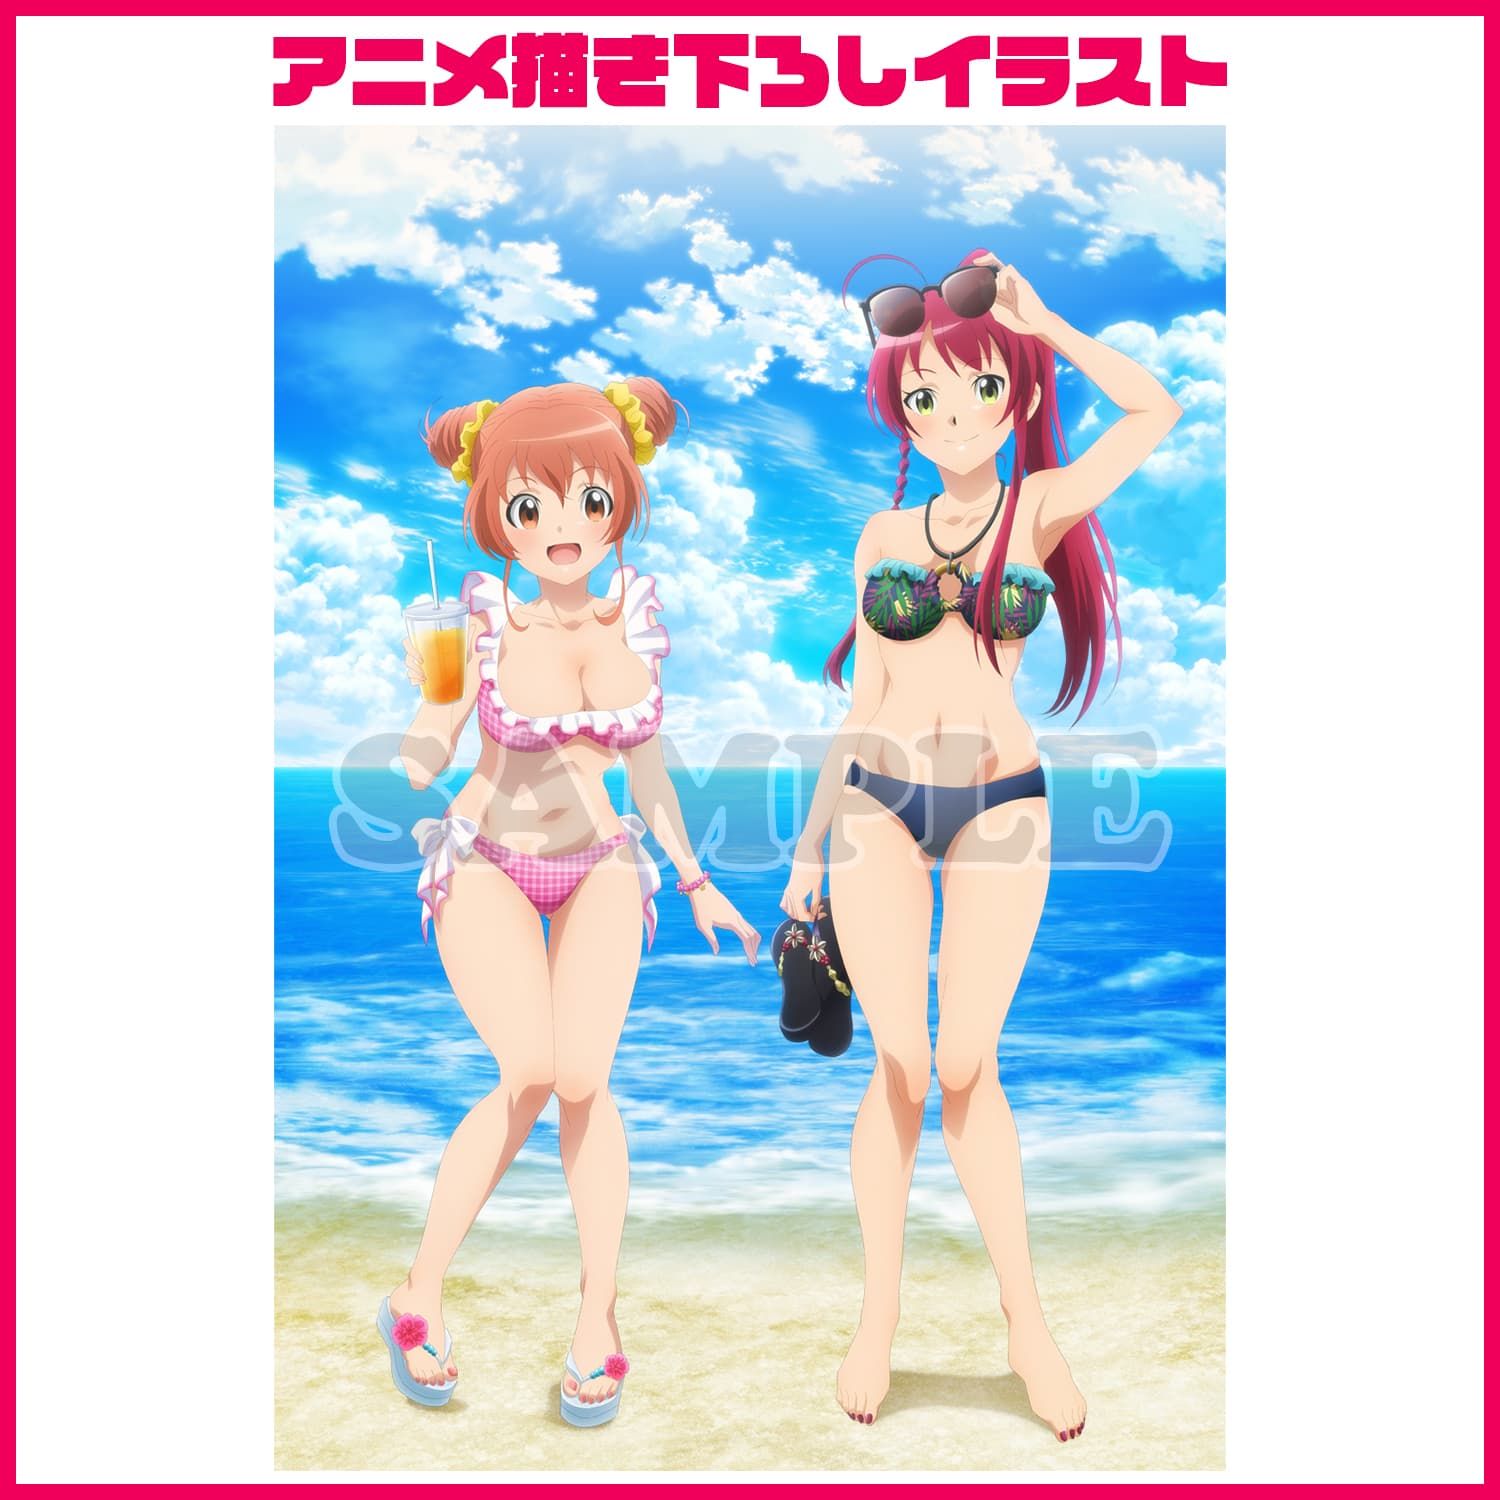 Erotic store benefits such as erotic boob swimsuit illustration in the BD of the second season of the anime "Working Demon King!" 5